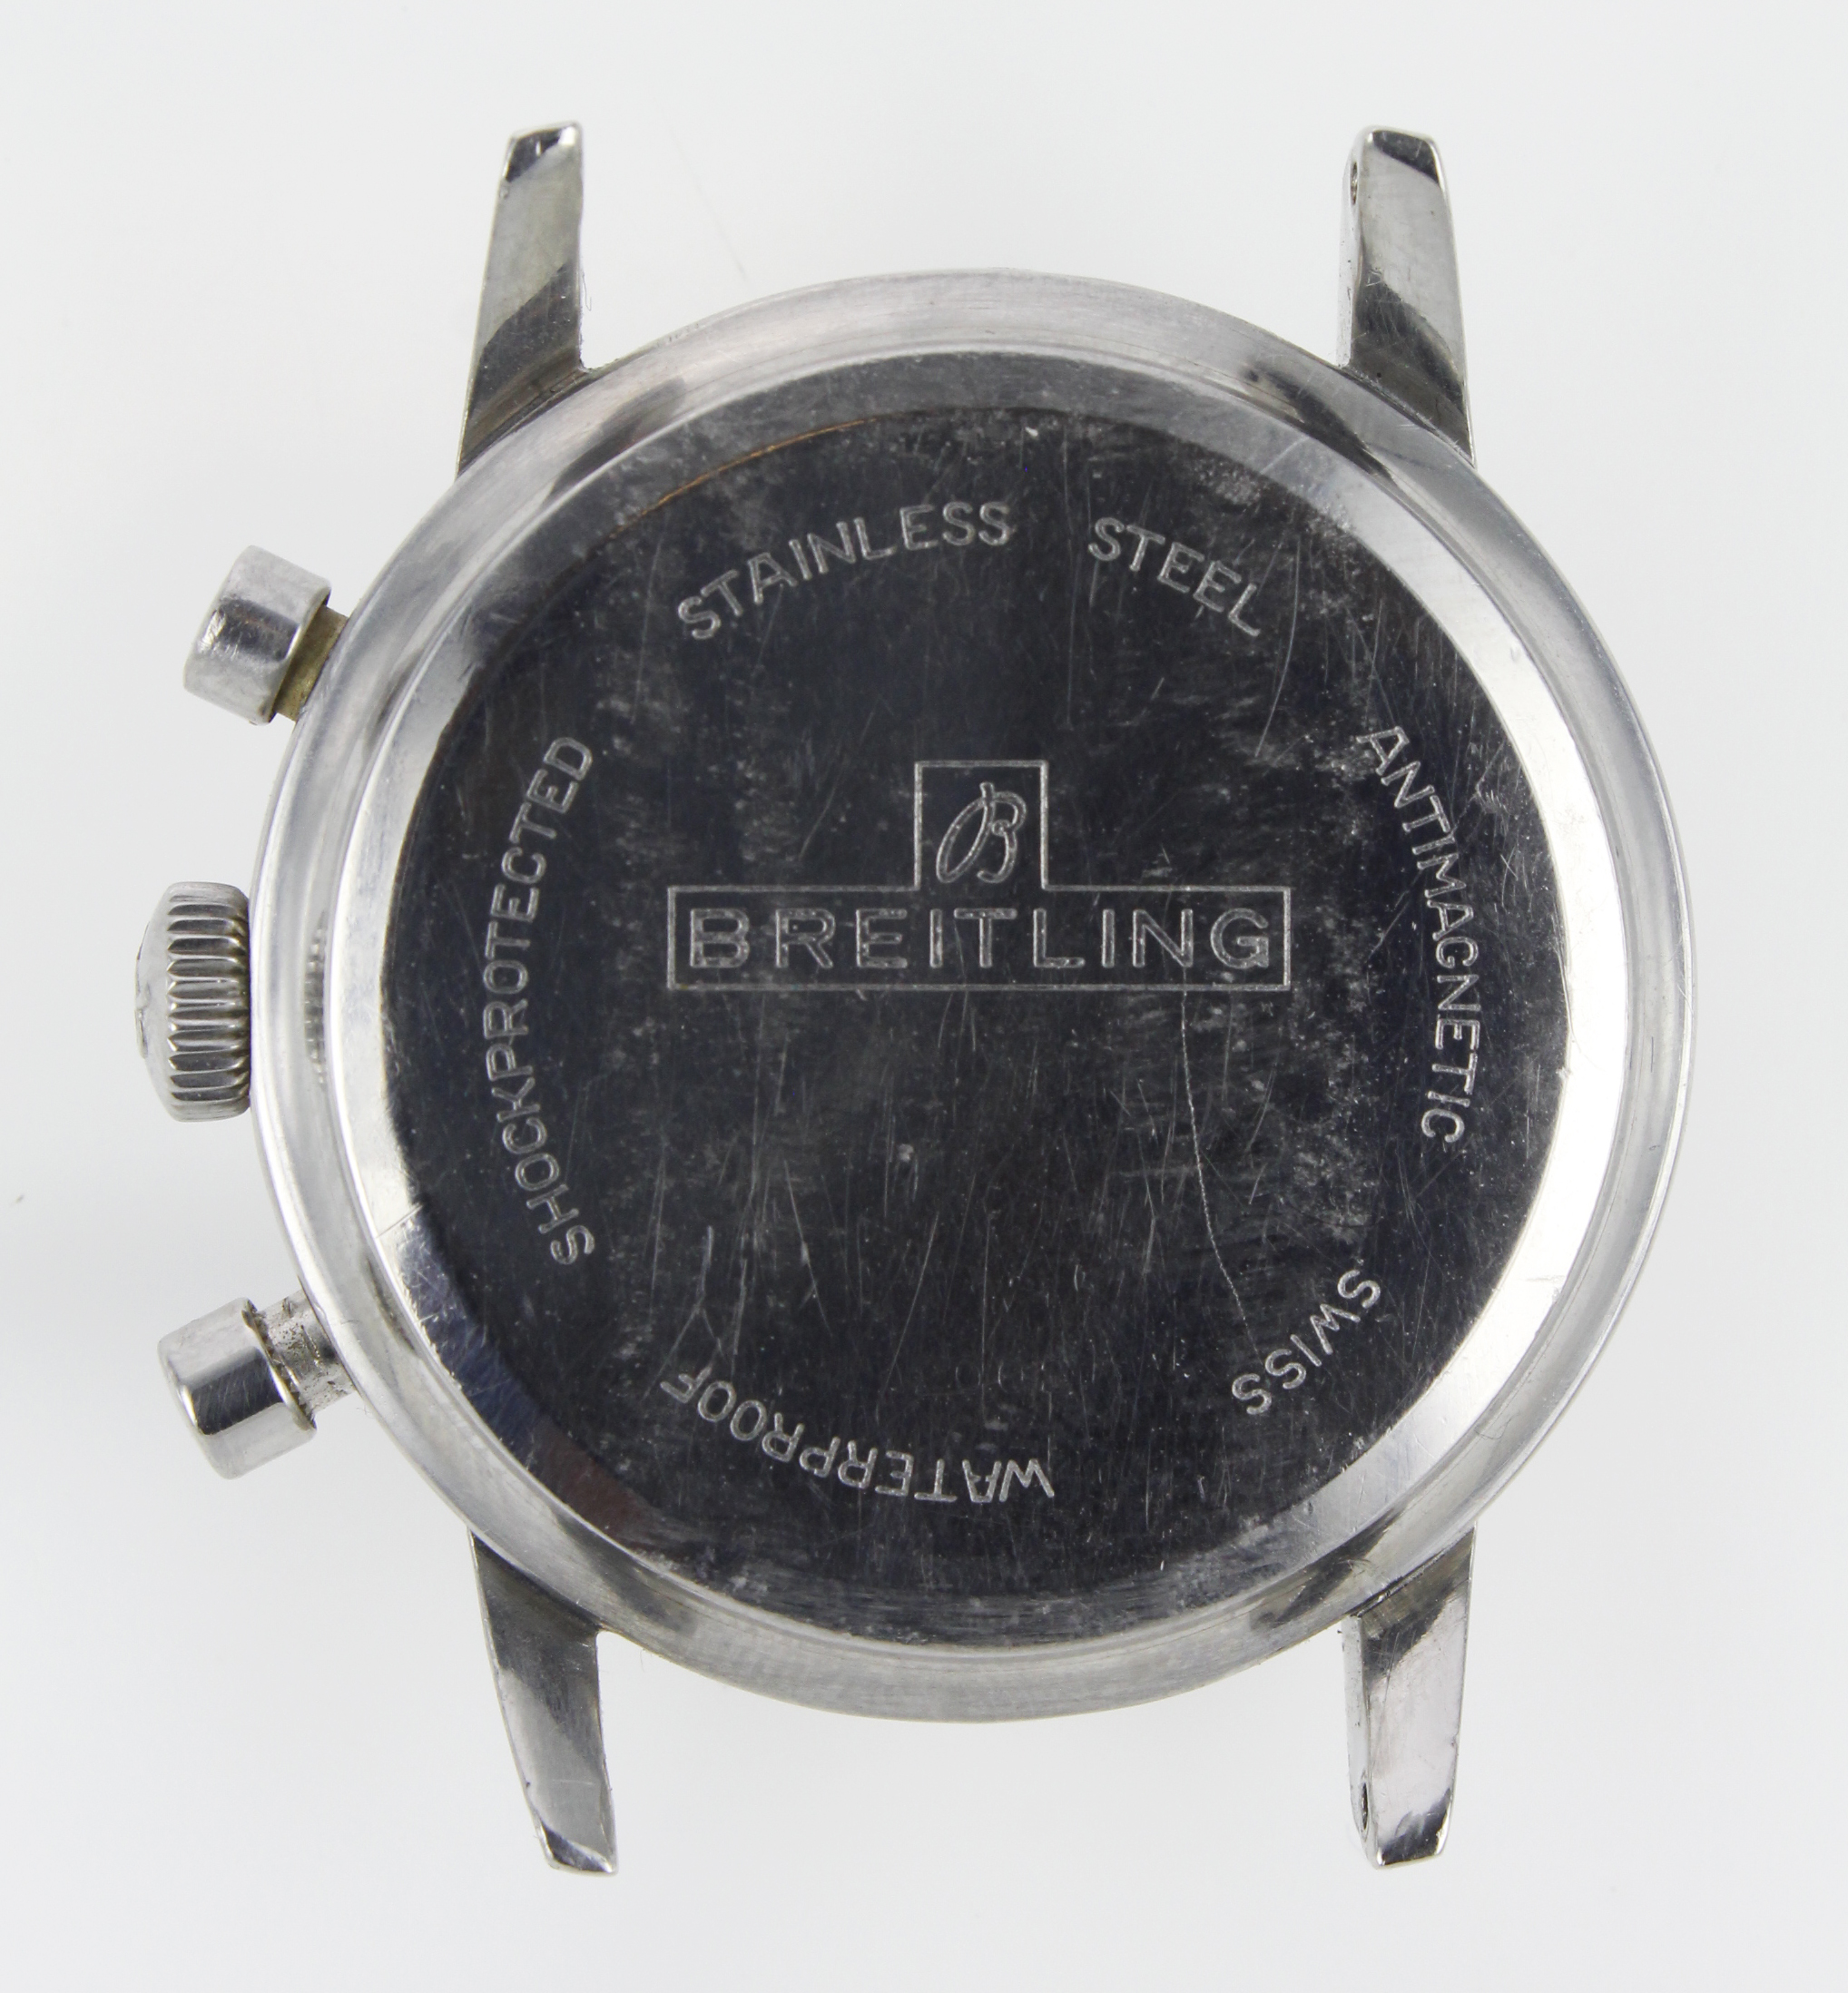 Breitling Top Time stainless steel cased manual wind chronograph gents wristwatch, ref. 2002, - Image 2 of 2